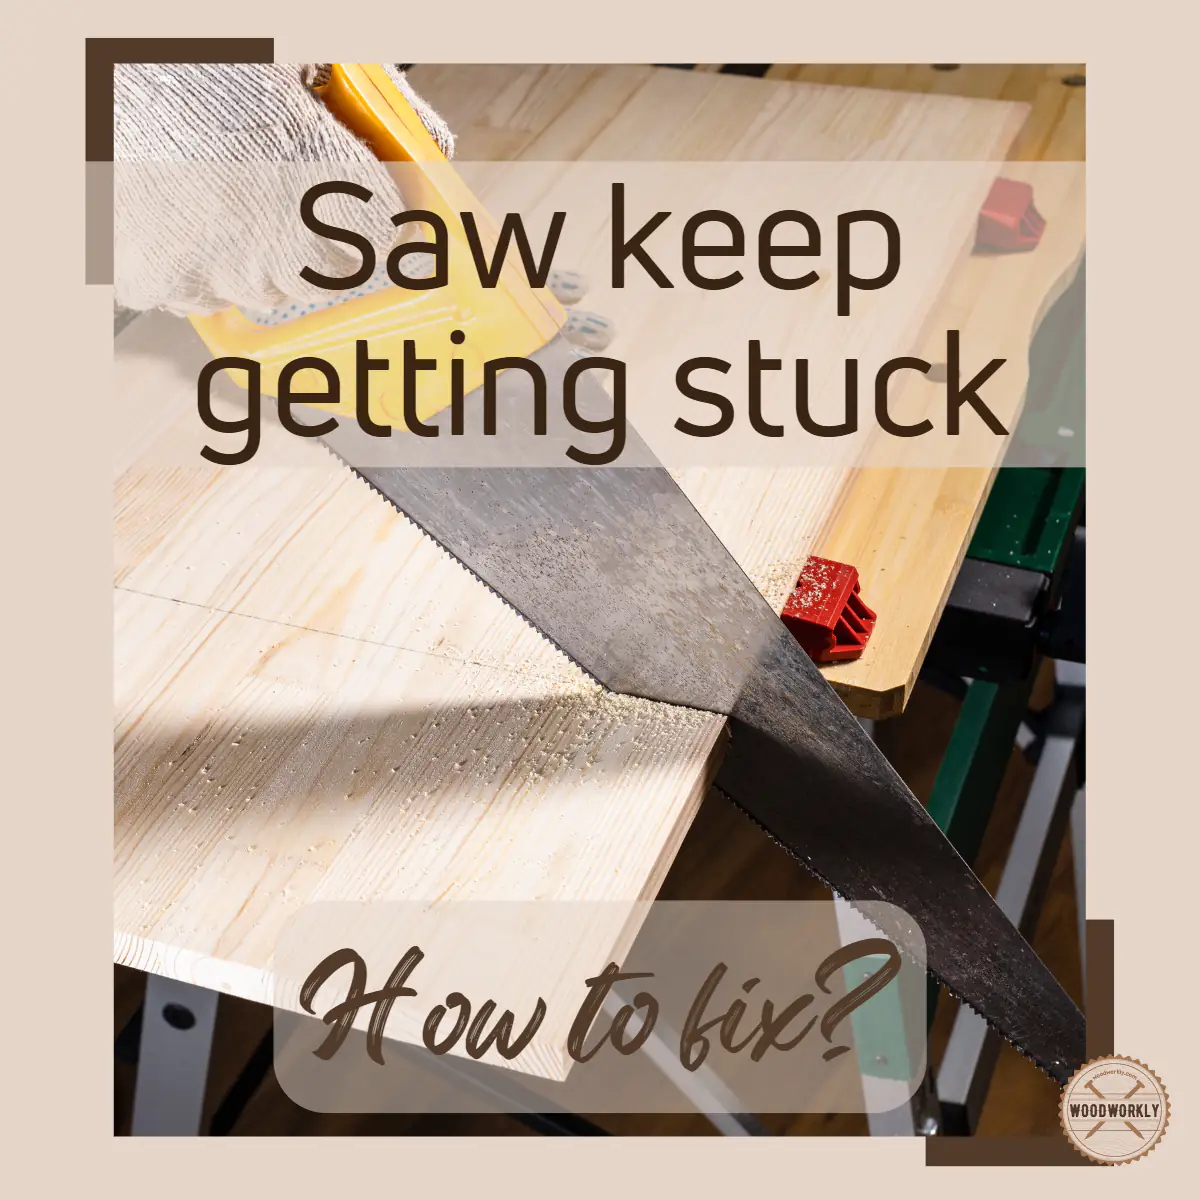 How to stop saw from sticking